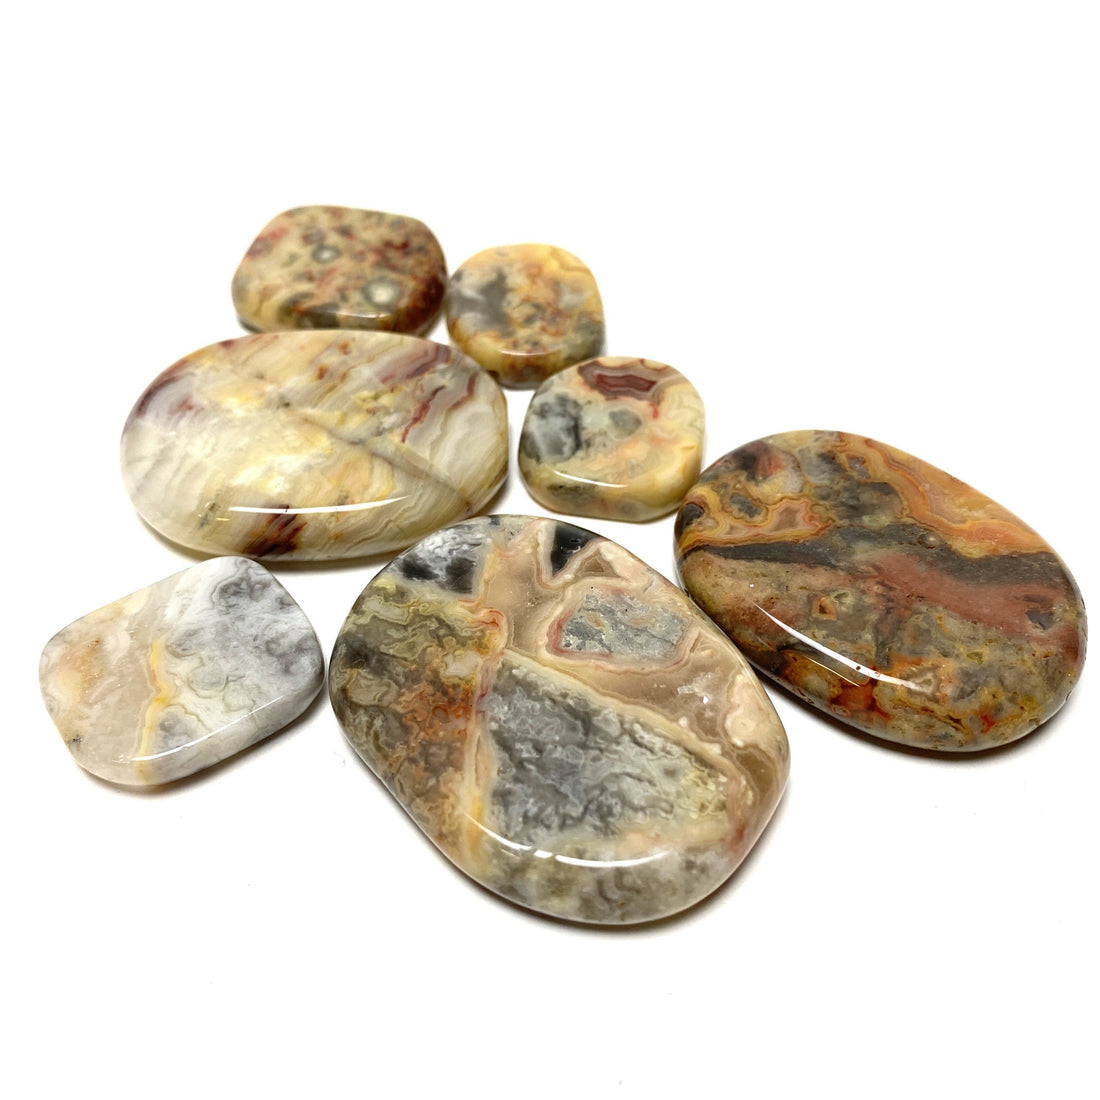 Crazy Lace Agate Medallions Crazy Lace Agate Crystals A. $4.00 